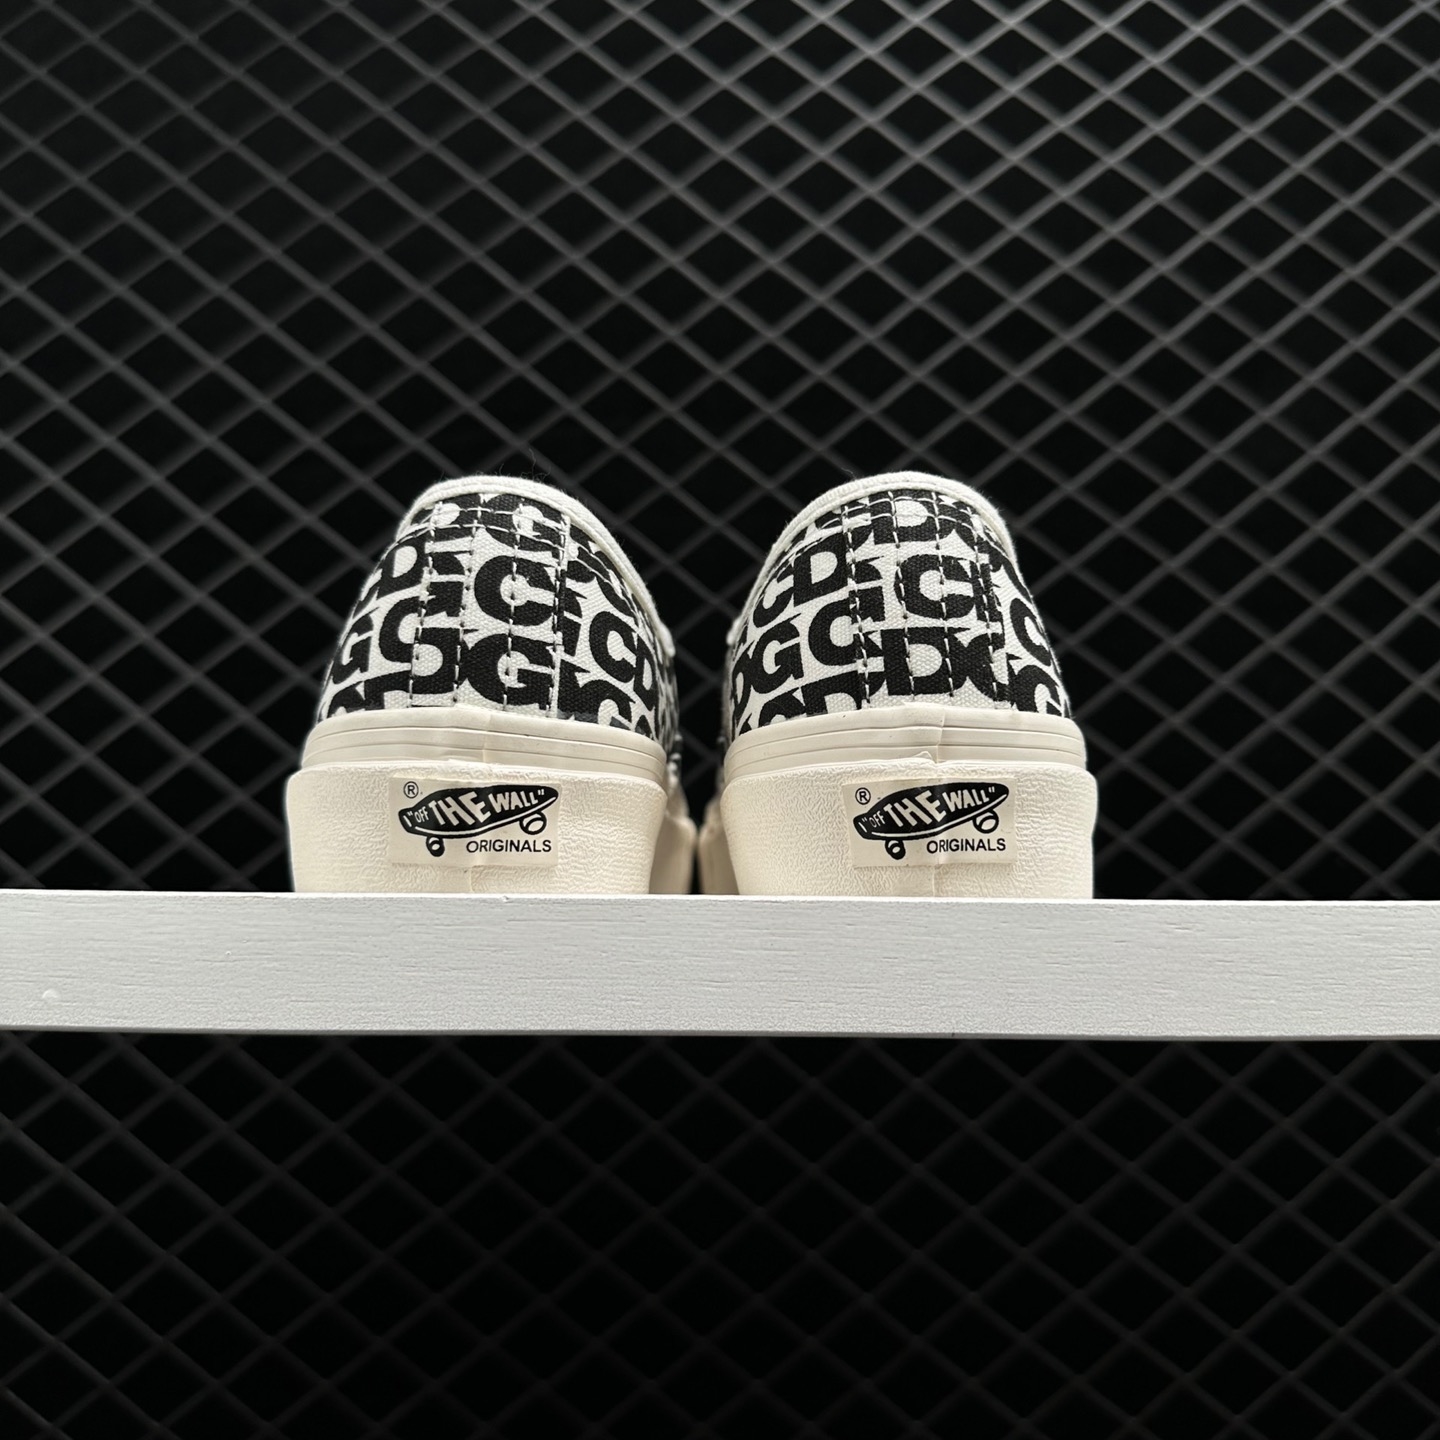 Vans Comme des x Authentic 'CDG' VN0A33TASHM - Limited Edition Collaboration Sneakers